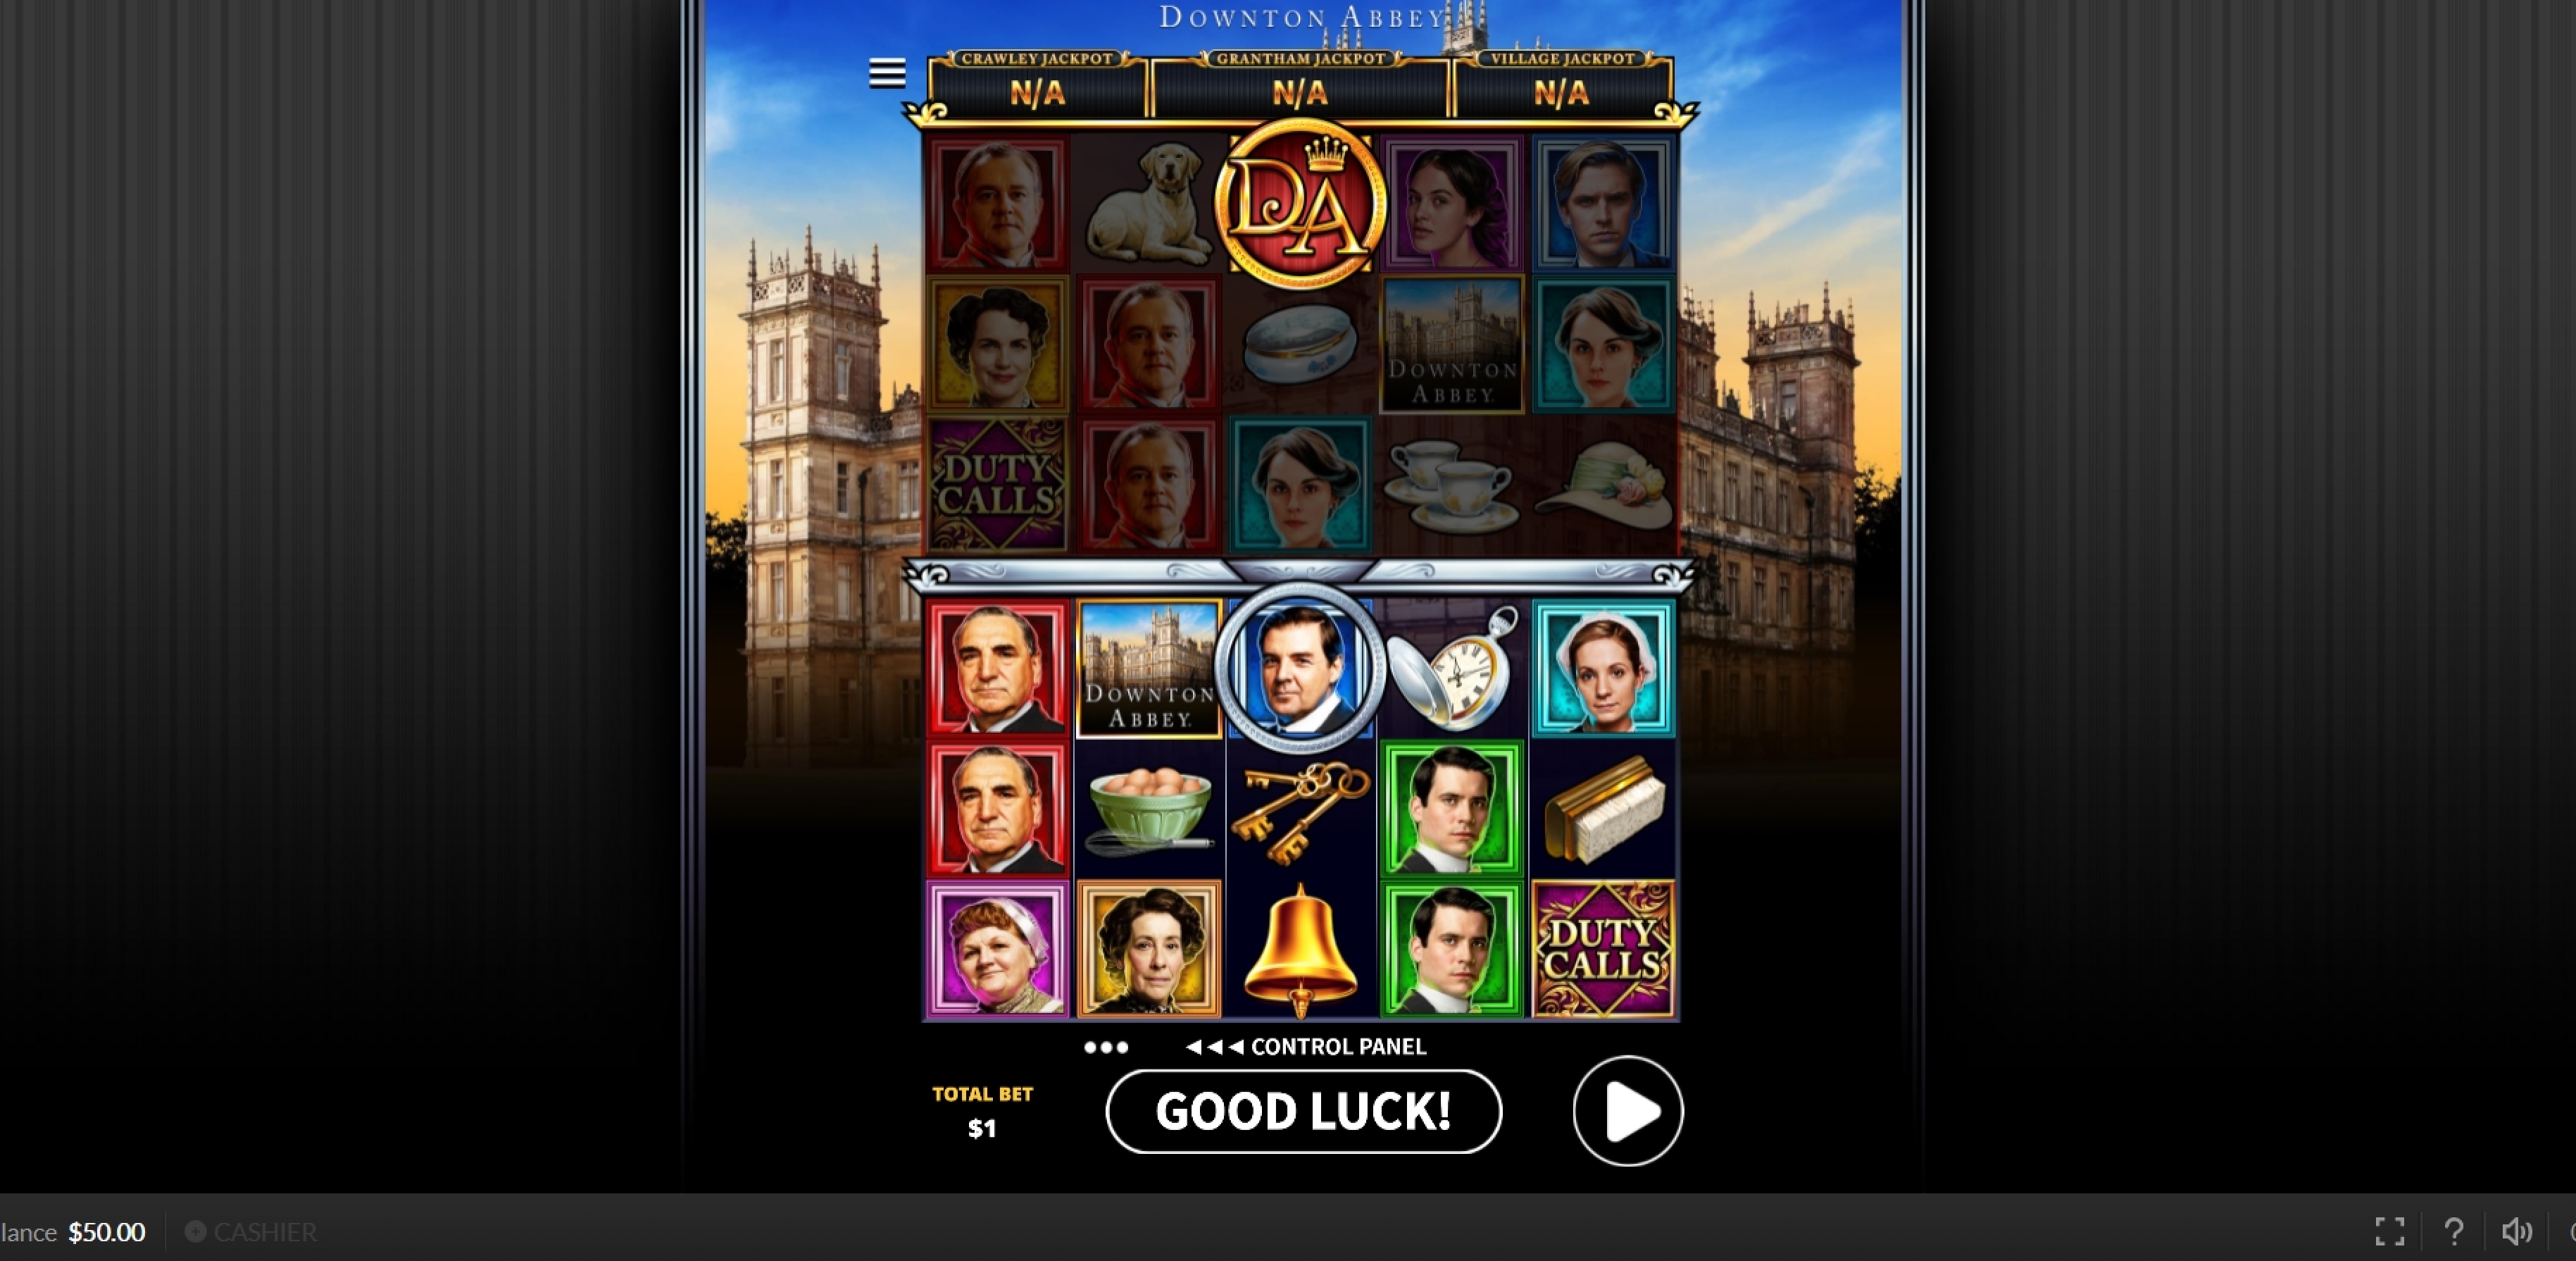 Reels in Downton Abbey Slot Game by Skywind